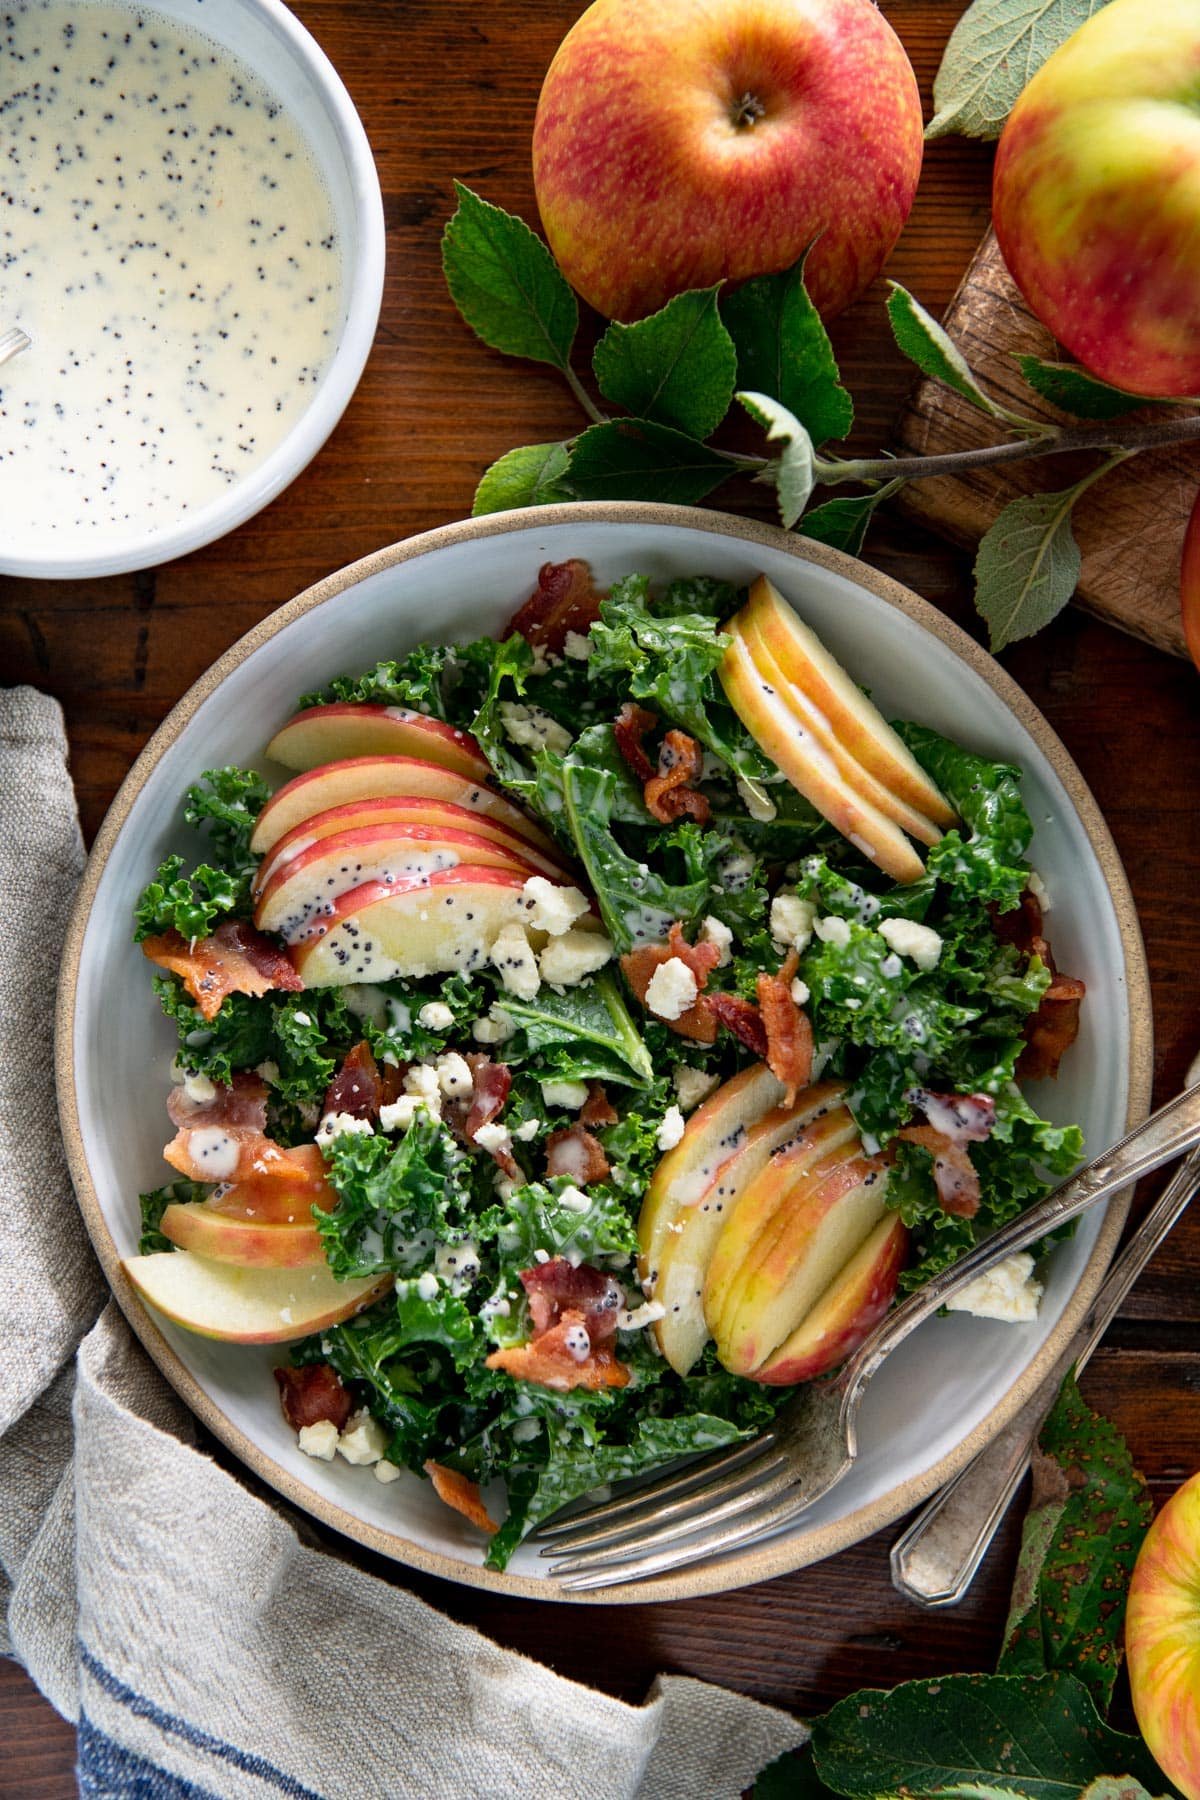 Overhead image of a kale salad with apples on a wooden table.